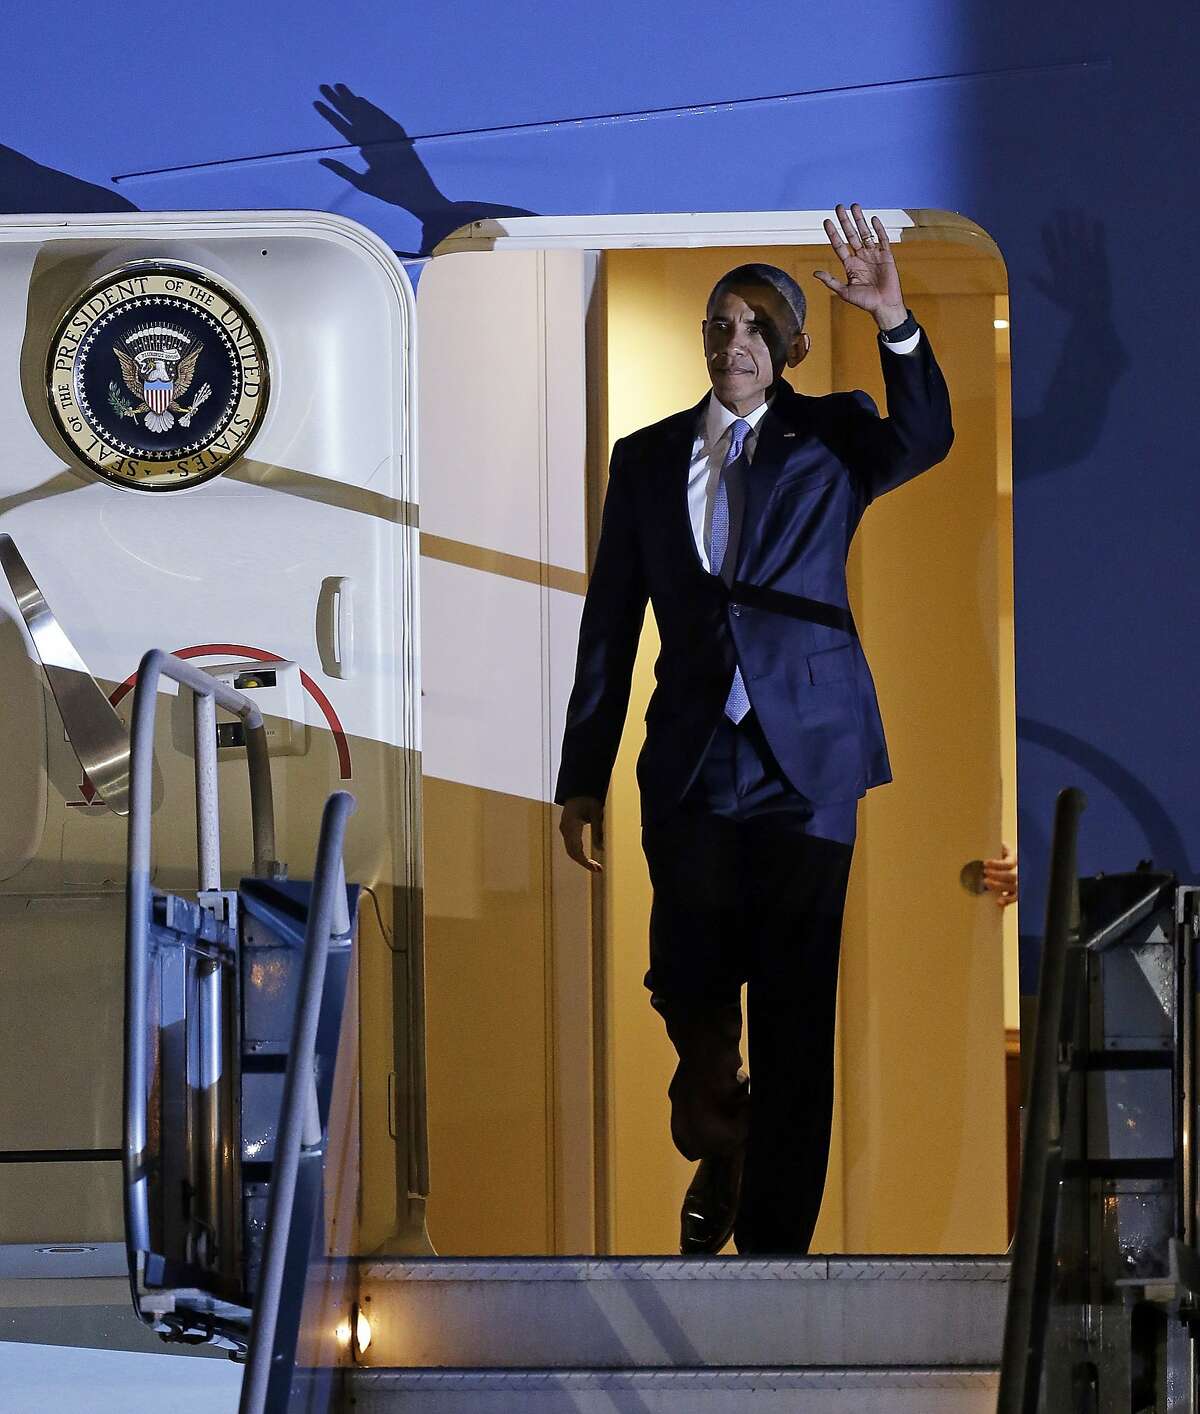 President Barack Obama waves as he exits Air Force One on Friday, Oct. 9, 2015, in San Francisco.  